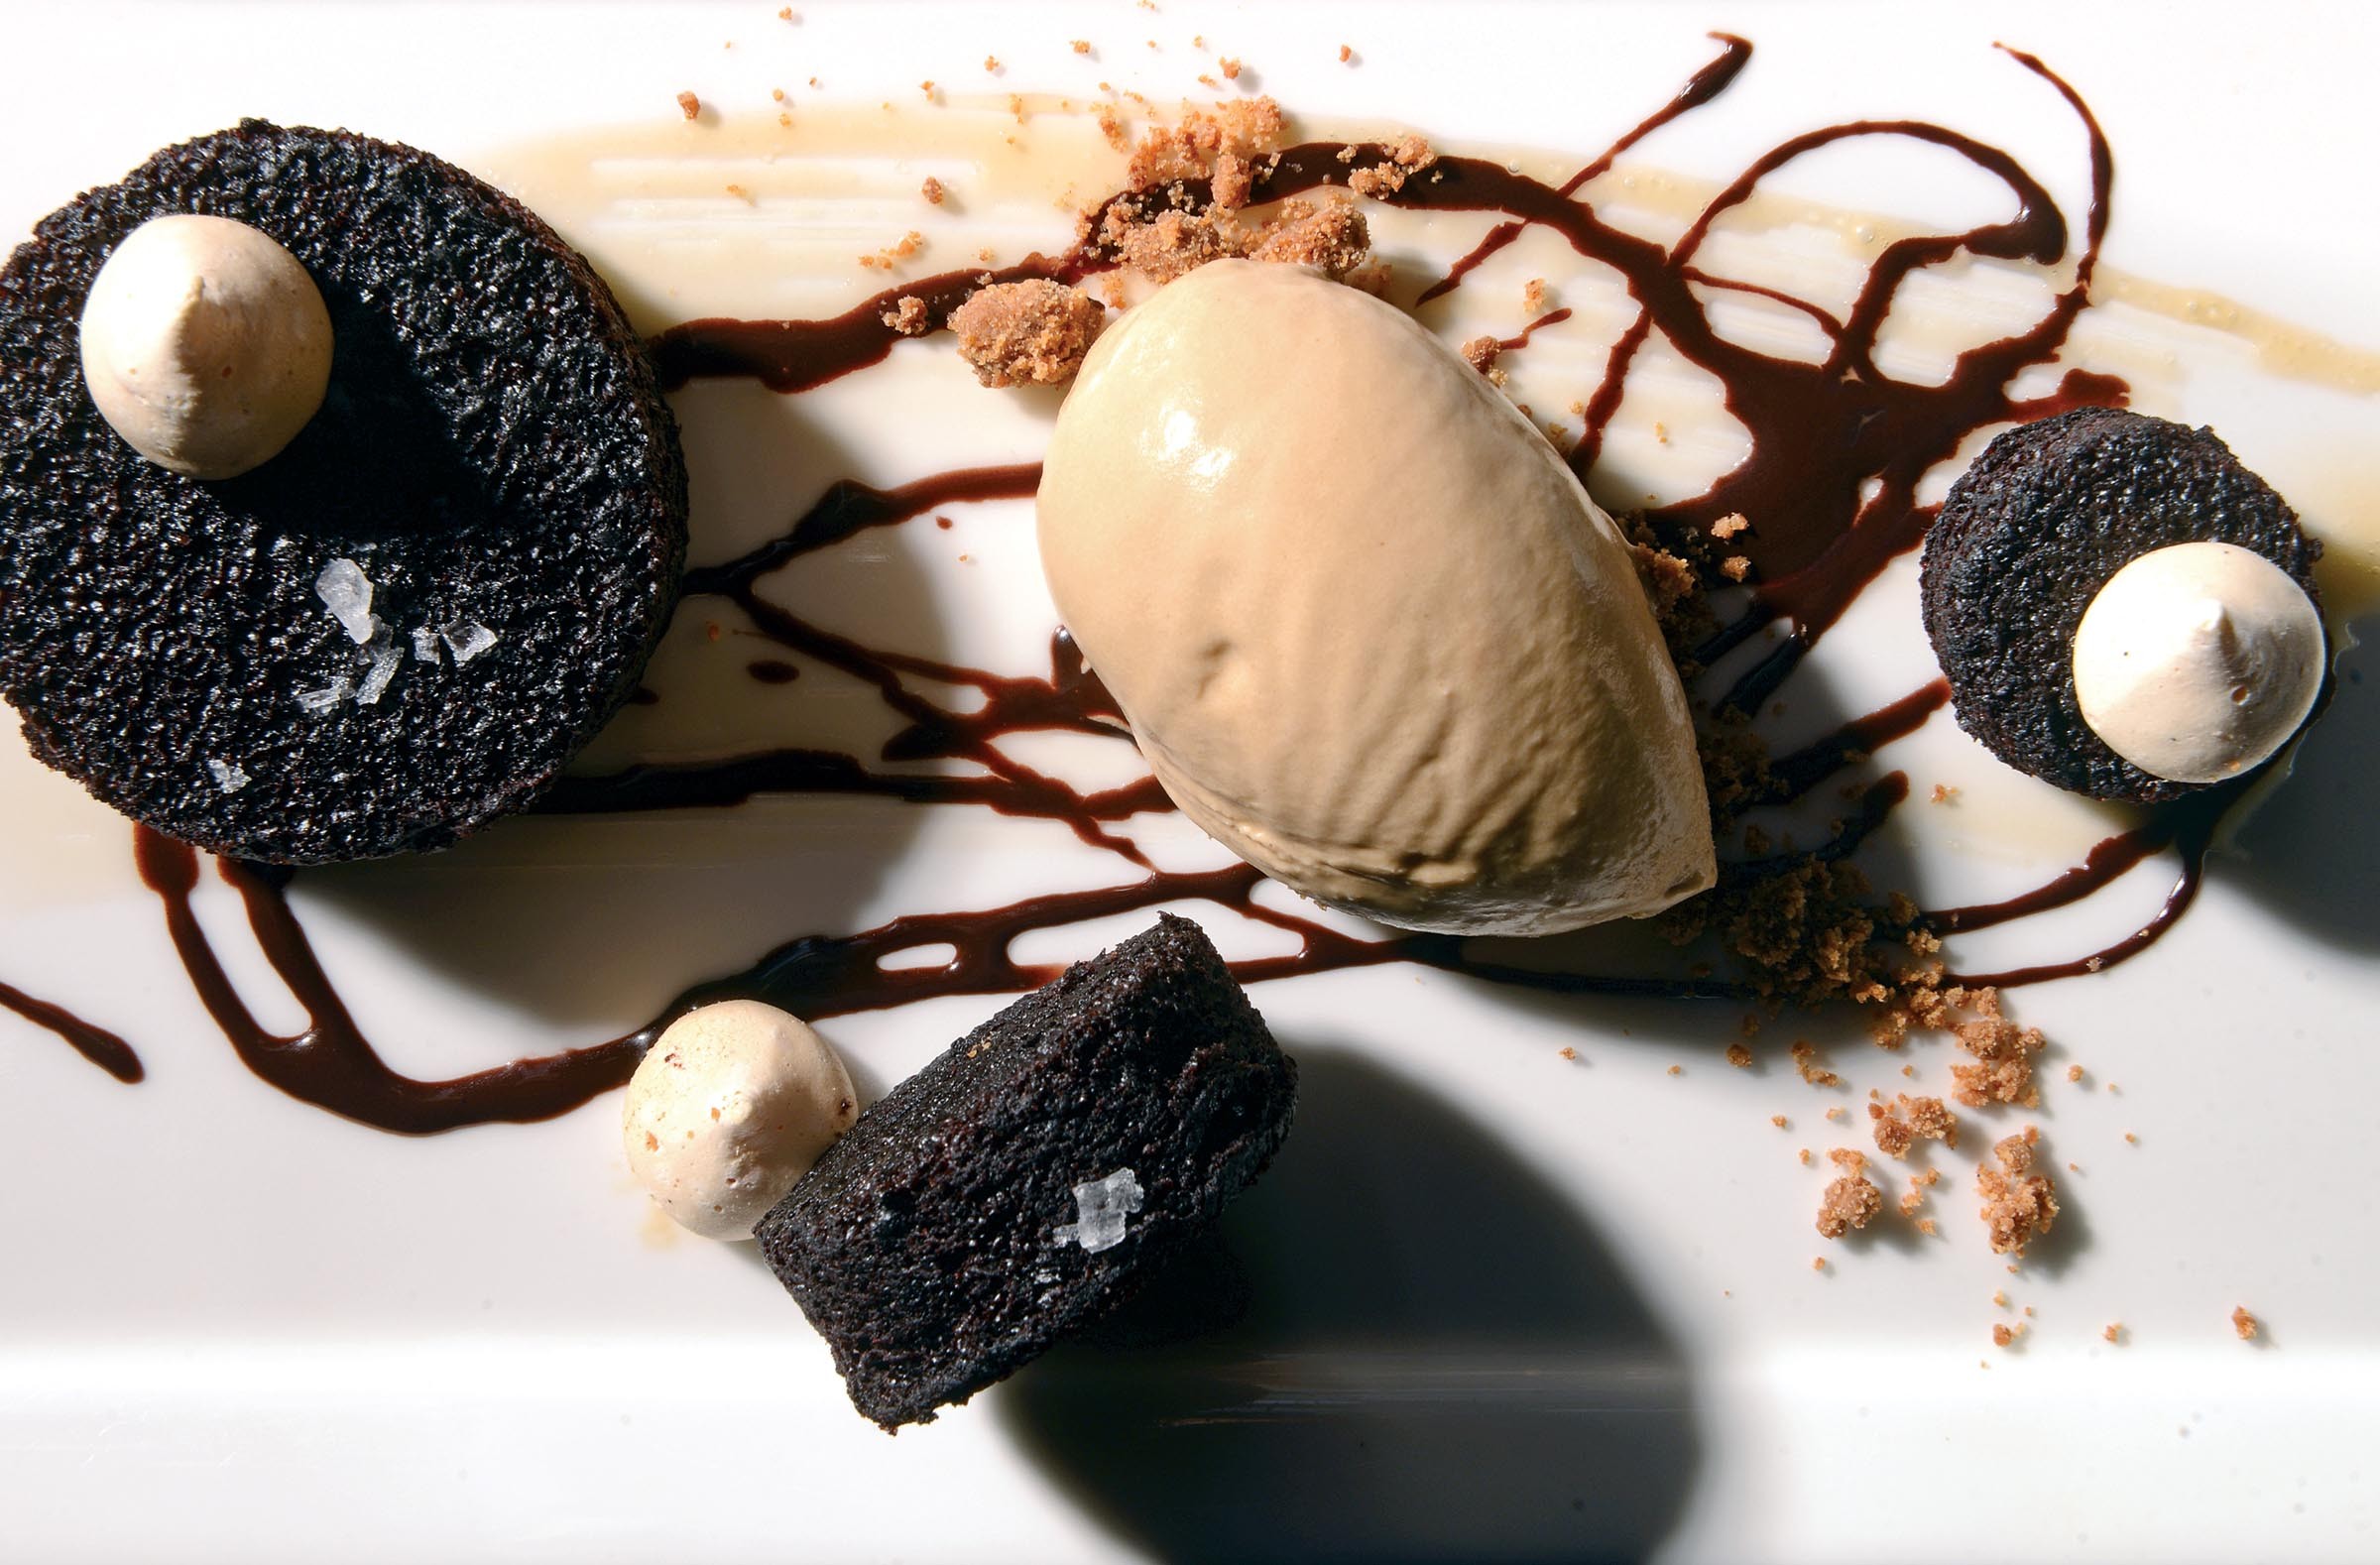 Chocolate cake at Patina is a work of art with salted caramel ice cream and meringue drizzled with chocolate. The Short Pump restaurant has a new owner, chef and menu. - SCOTT ELMQUIST